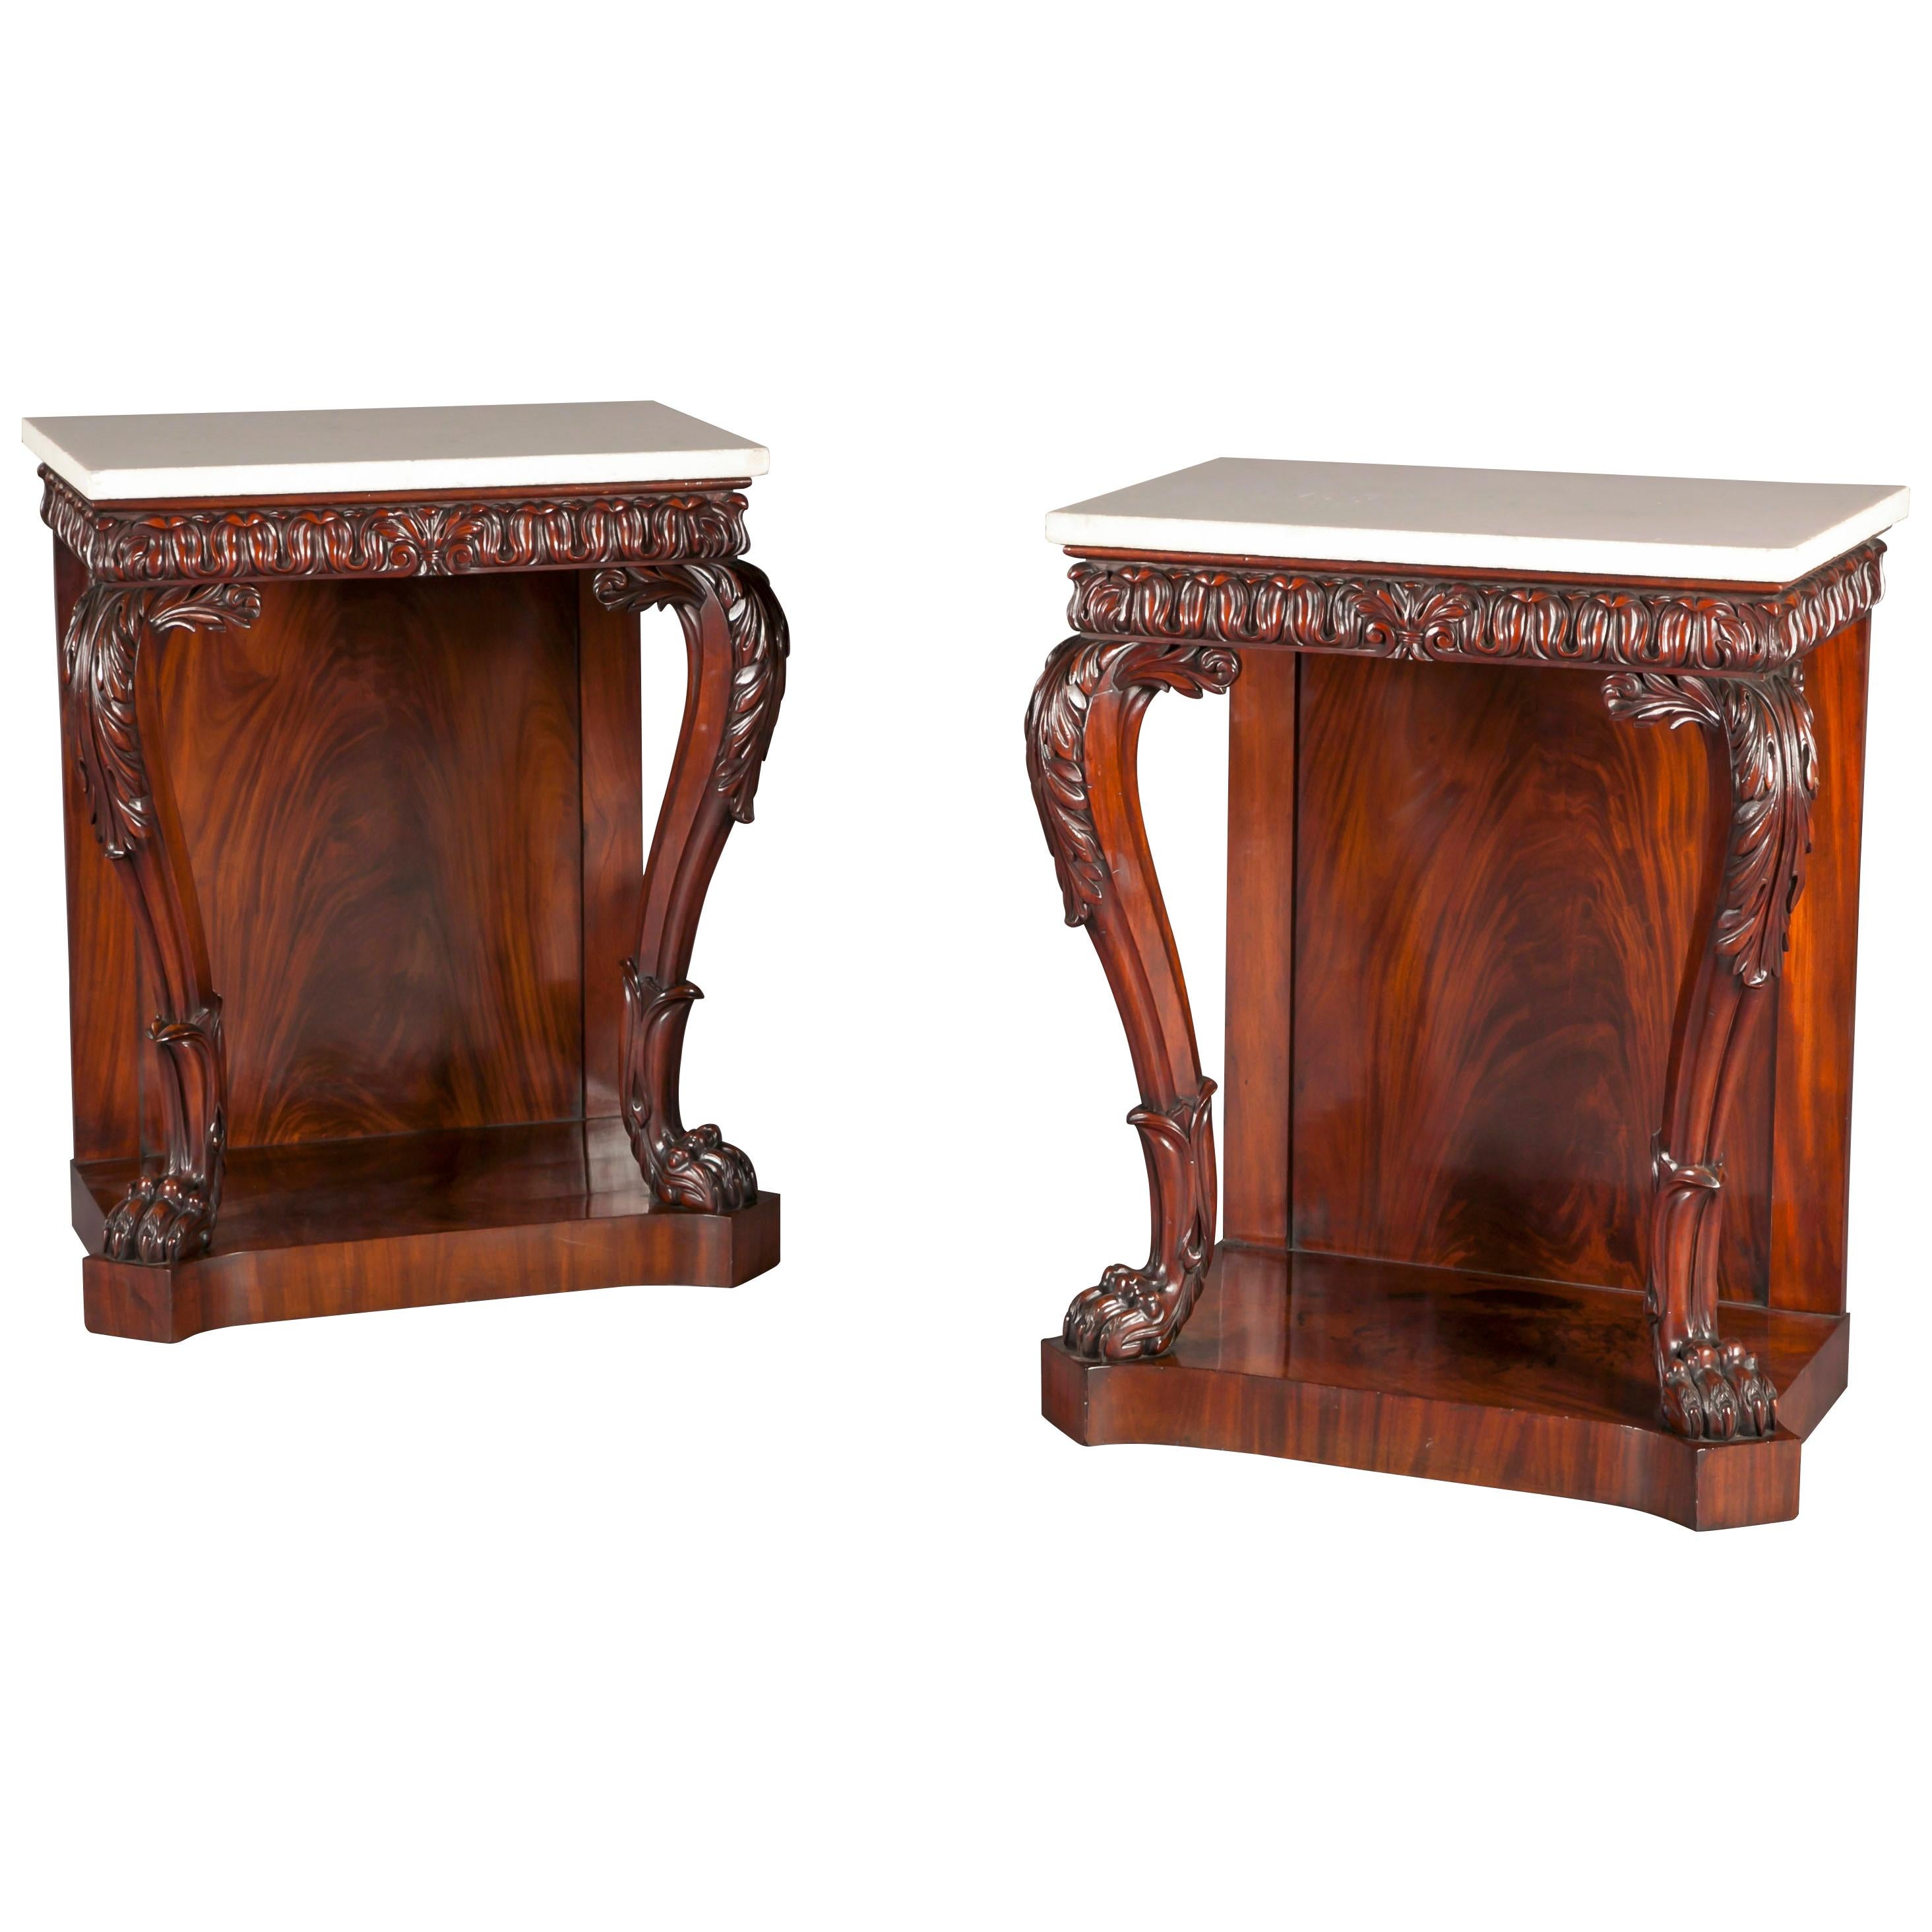 Pair of Brown and White Regency Mahogany Console Tables